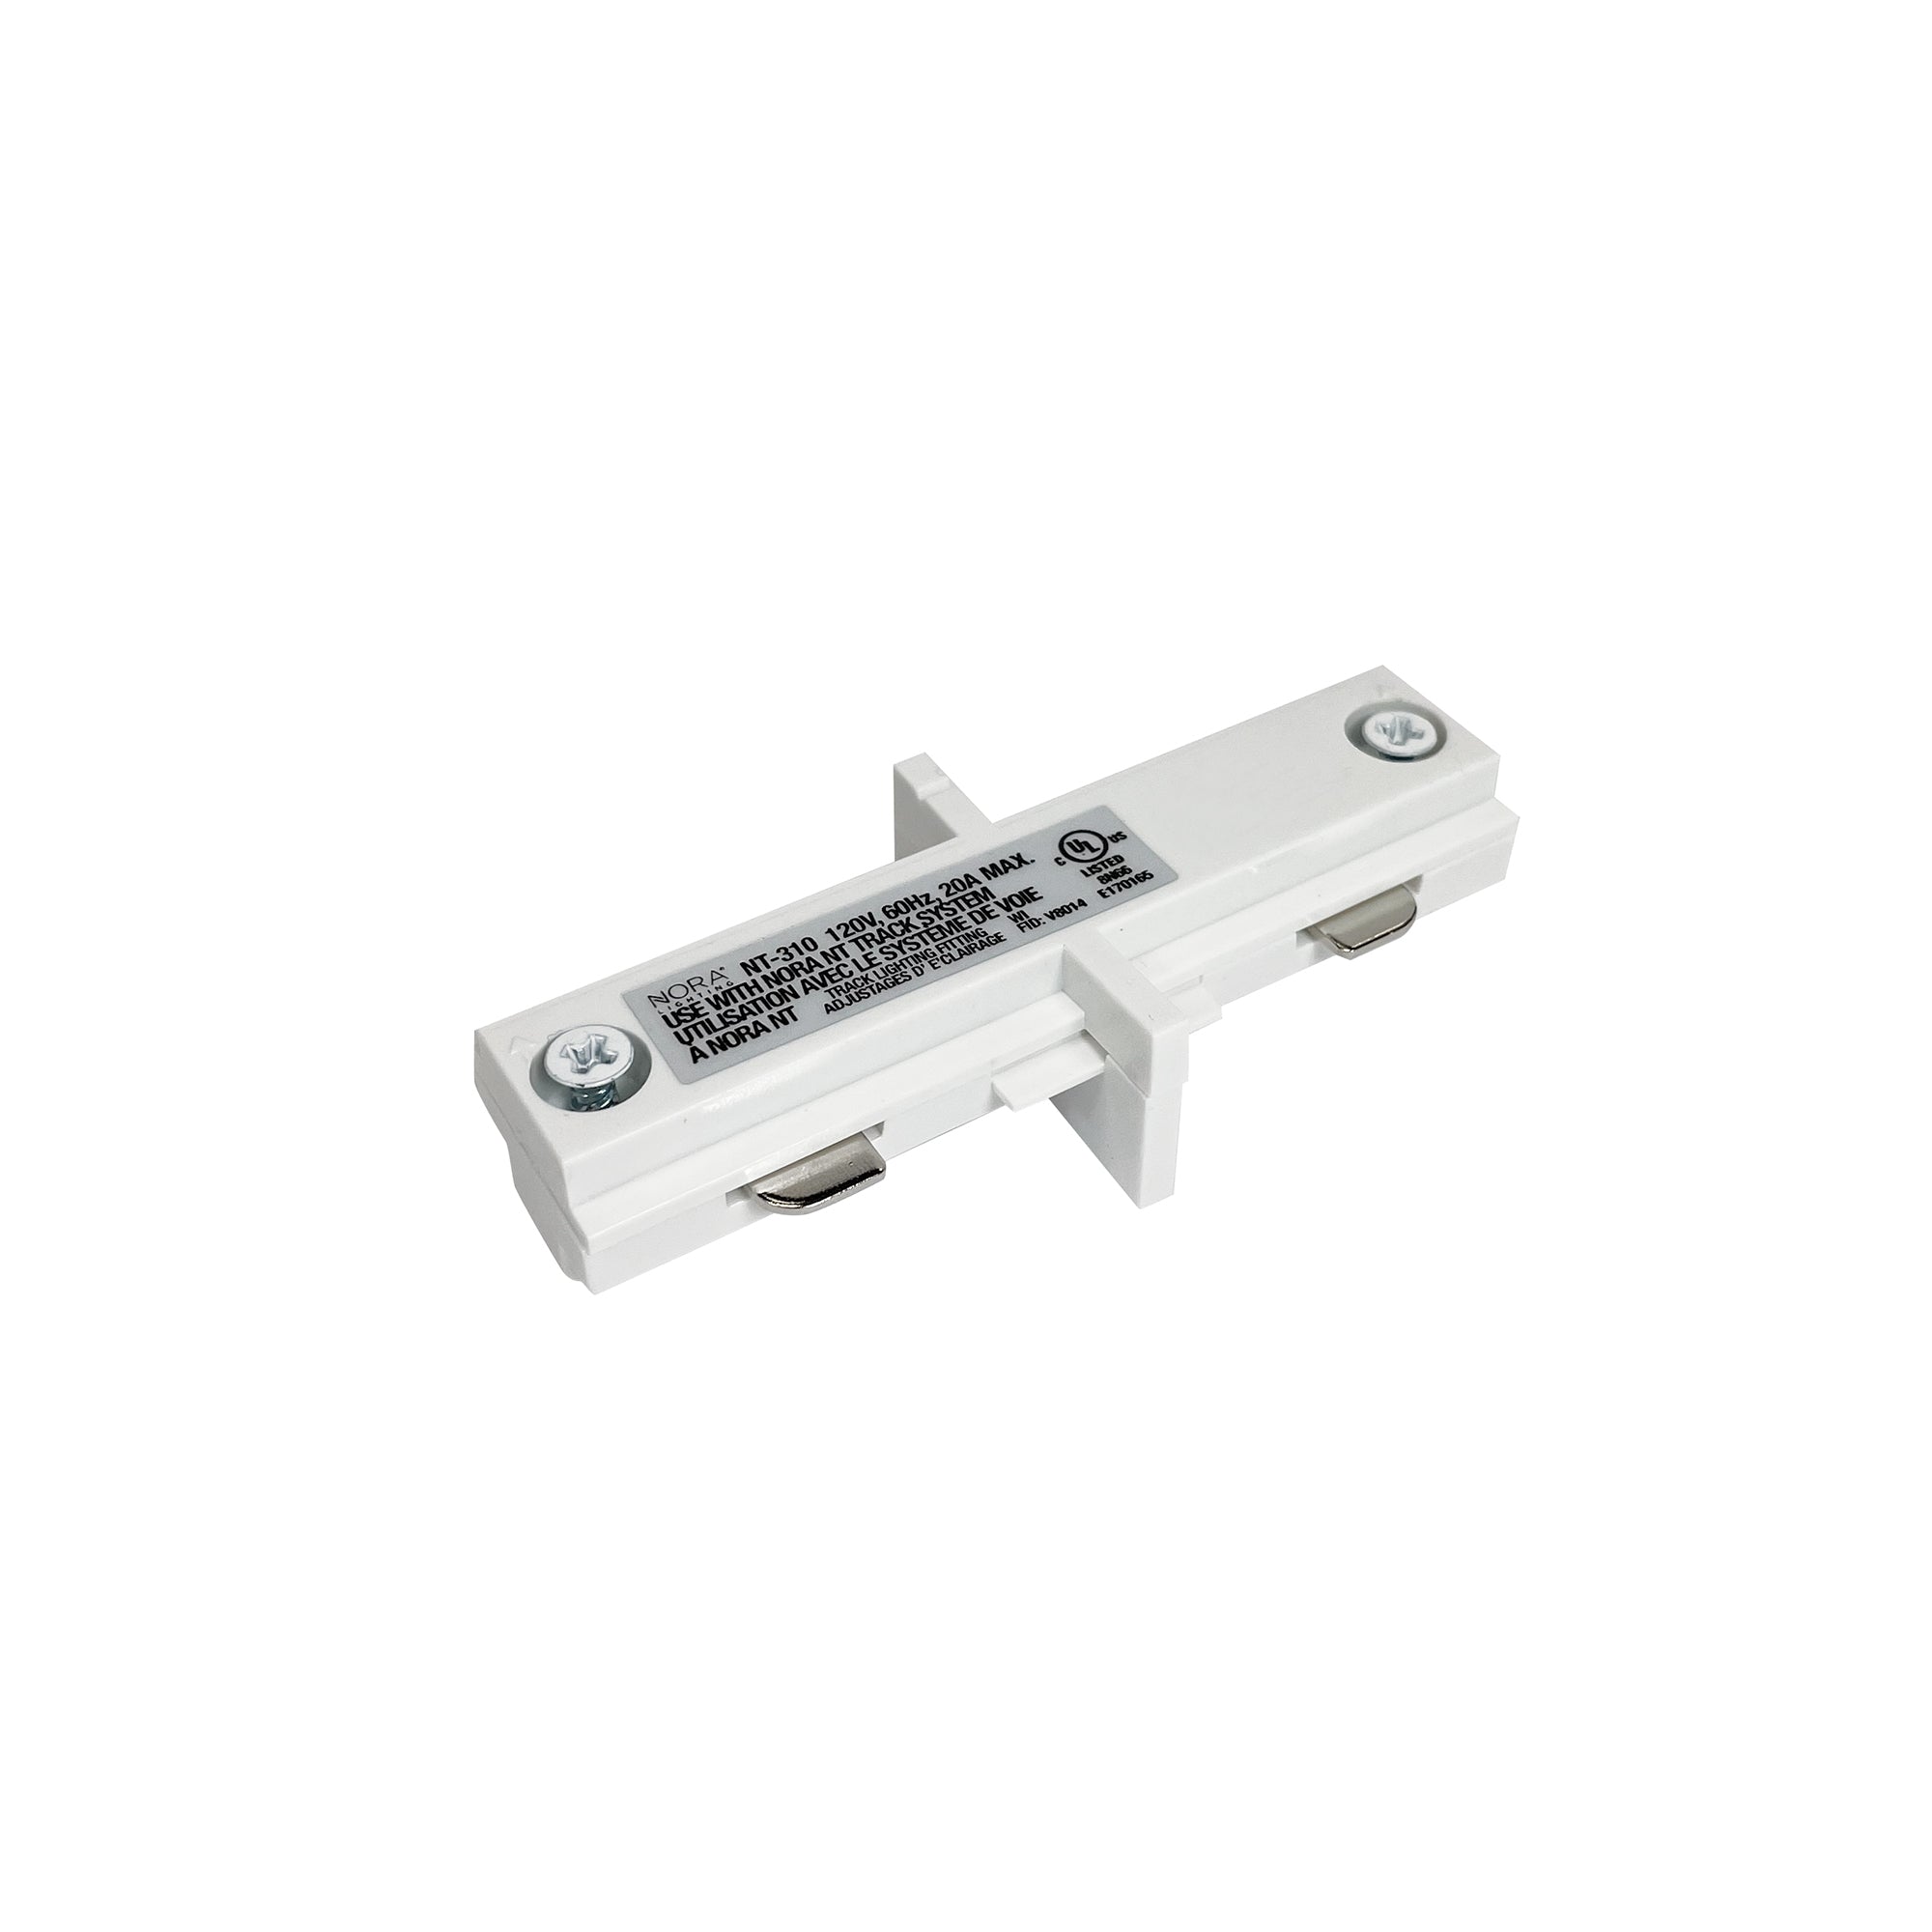 Nora Lighting NT-310W - Track - Straight Connector for 1 Circuit Track, White